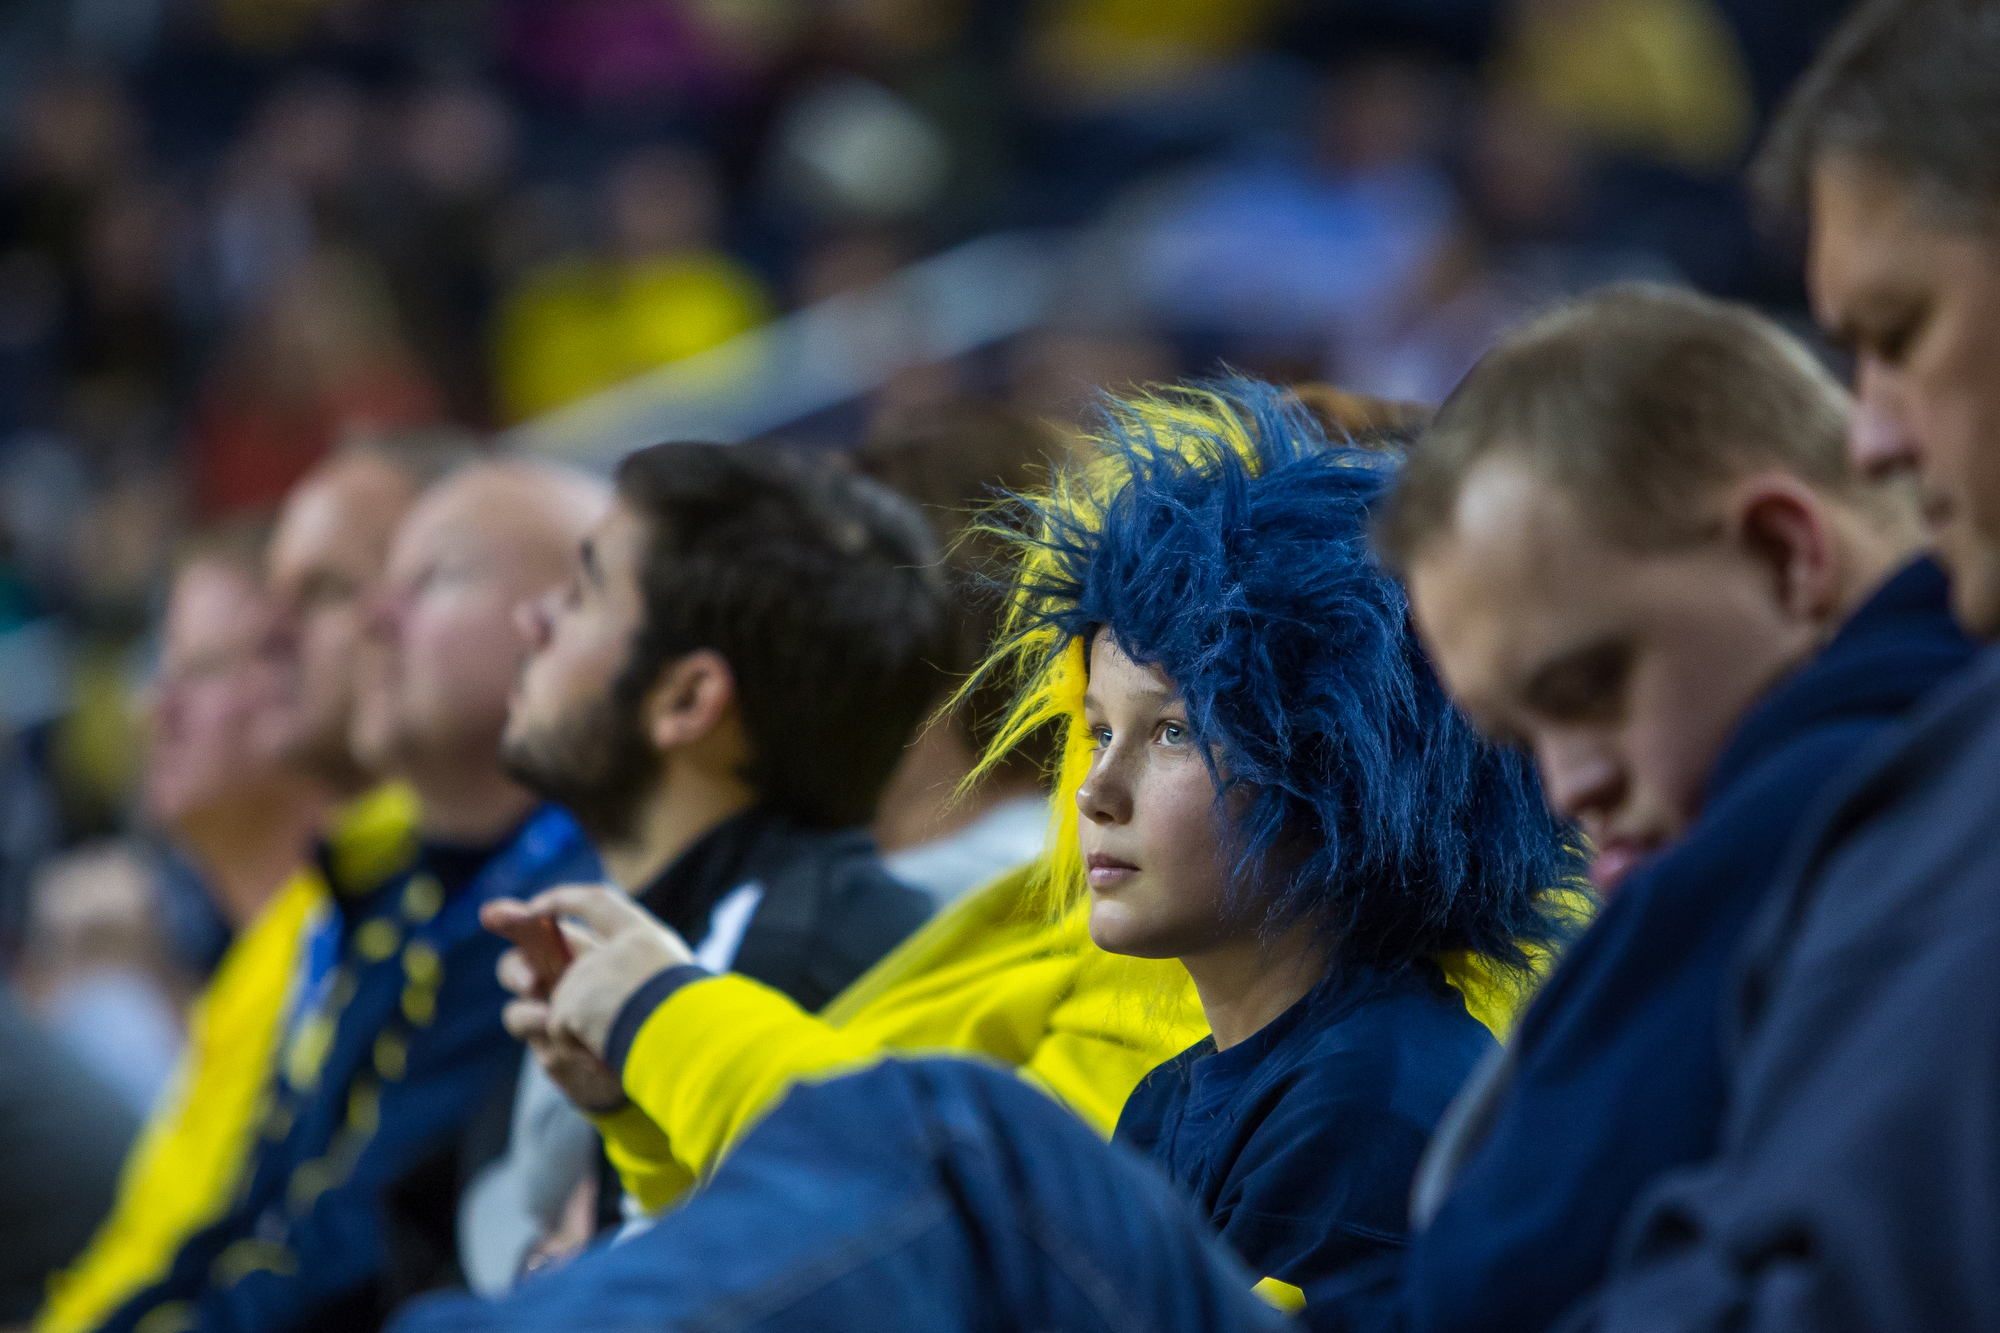  A Michigan fan watches the game during the second half of play at the Crisler Center on Saturday, December 17, 2016. The Michigan Wolverines beat the Maryland Eastern Shore Hawks 98-49. Matt Weigand | The Ann Arbor News 